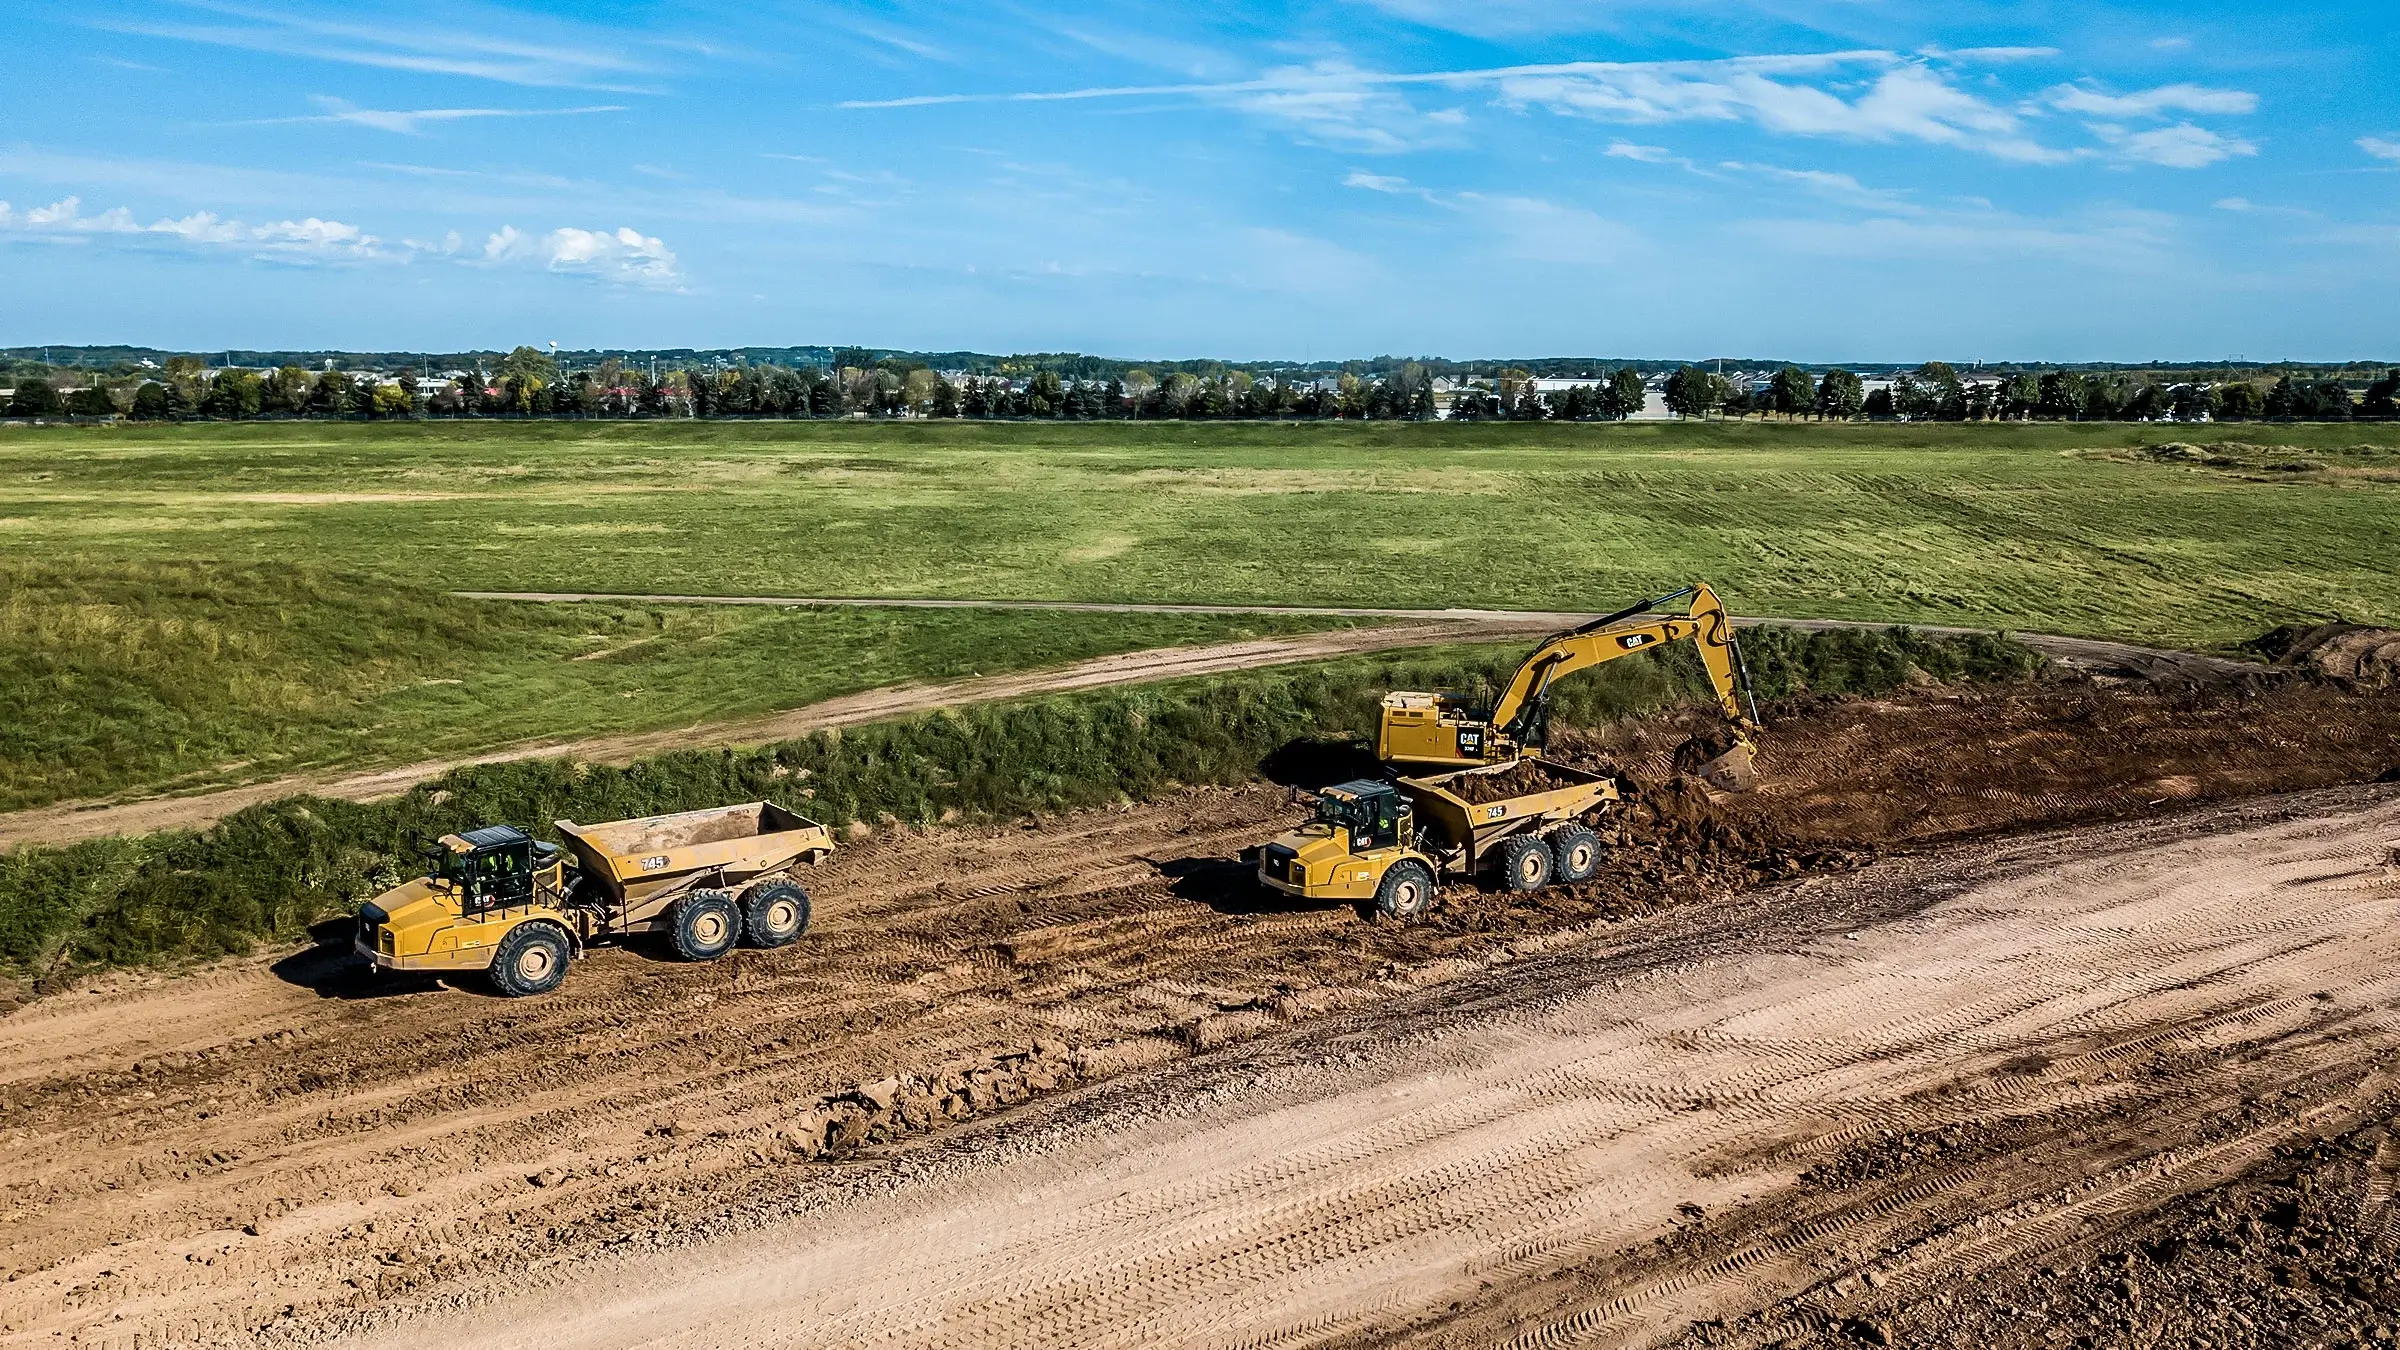 An excavator and several dumptrucks operate near a dirt road side, surrounded by green fields.